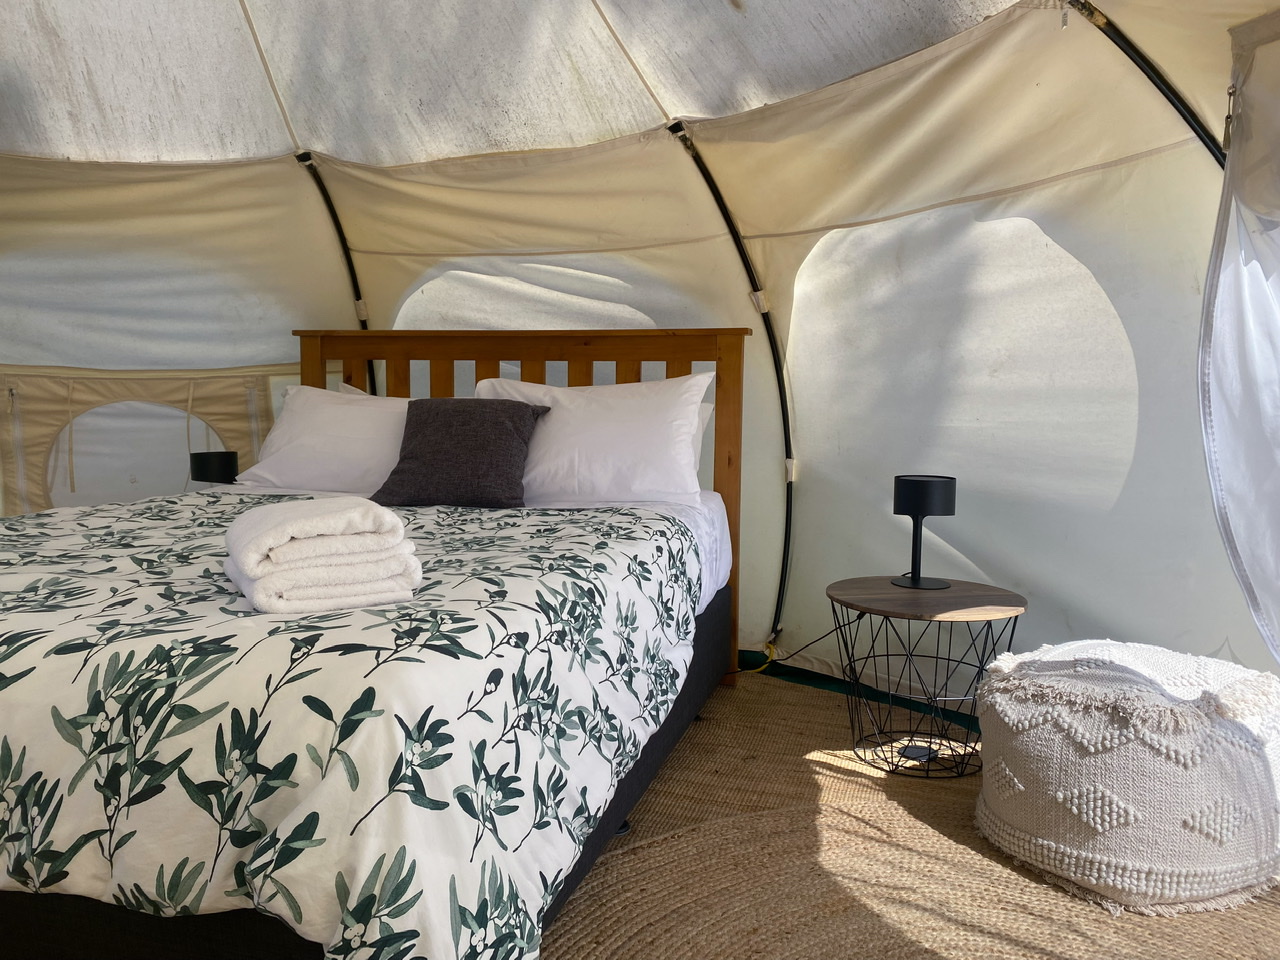 Double bed with towels stacked on it inside a glamping tent